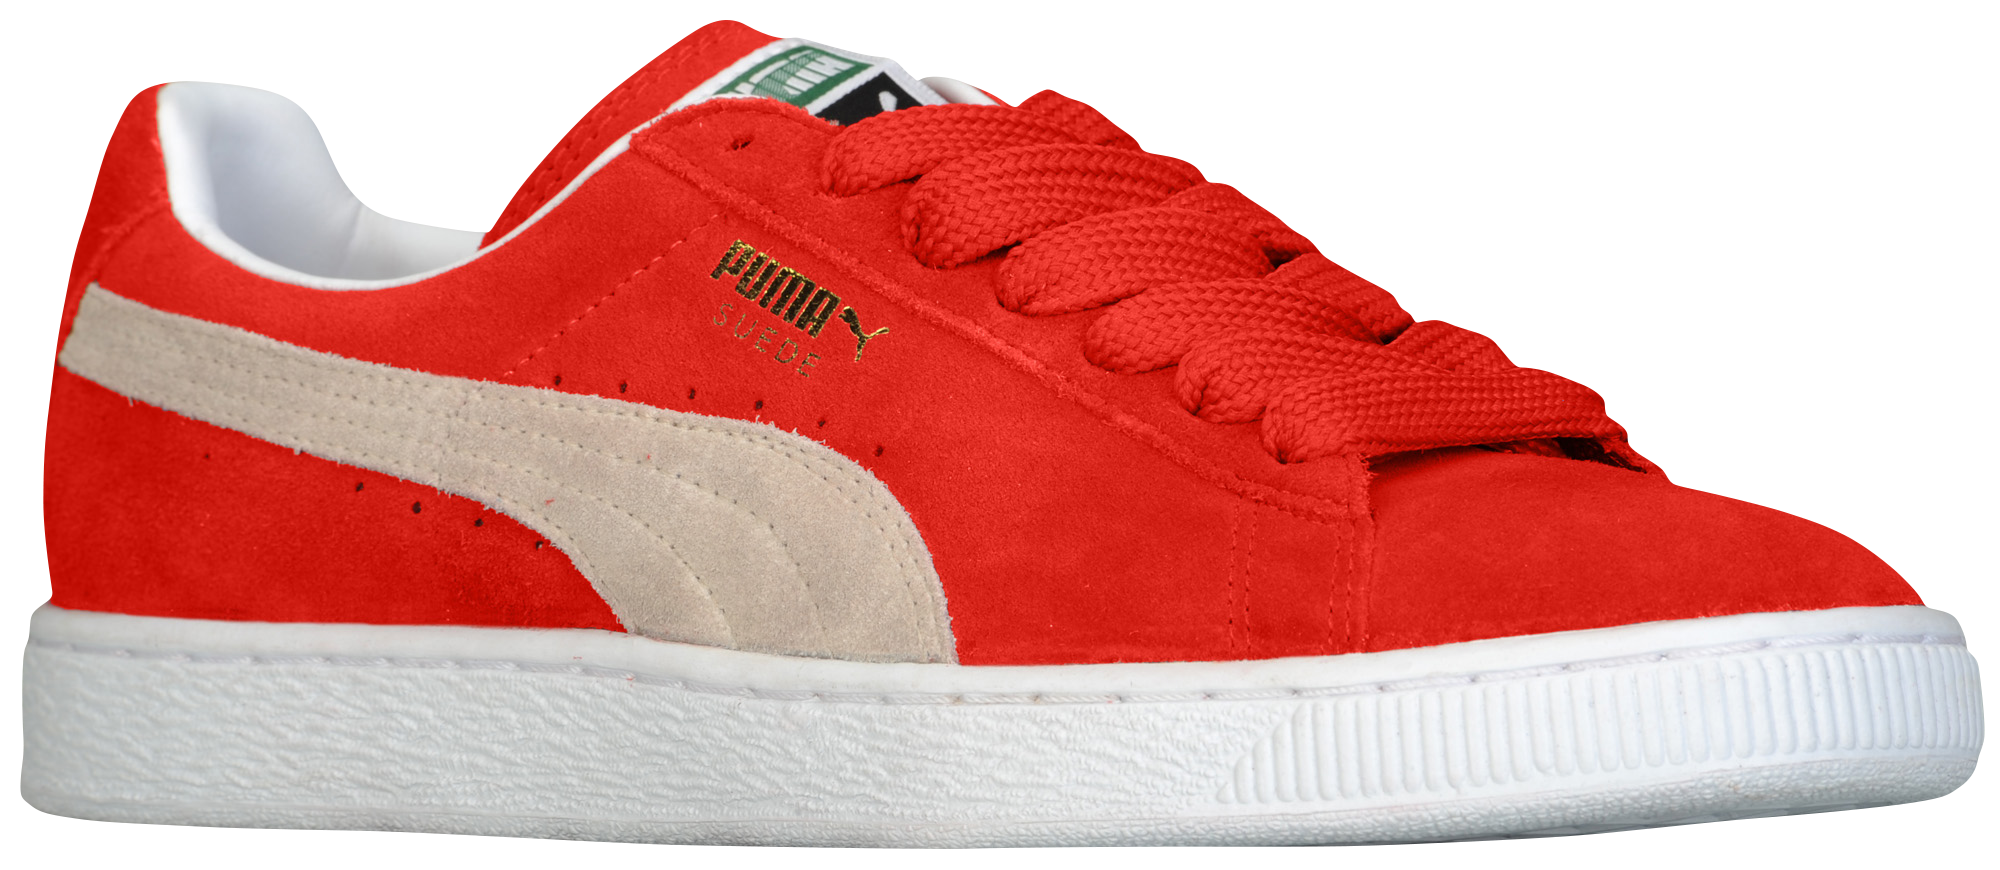 puma red suede shoes